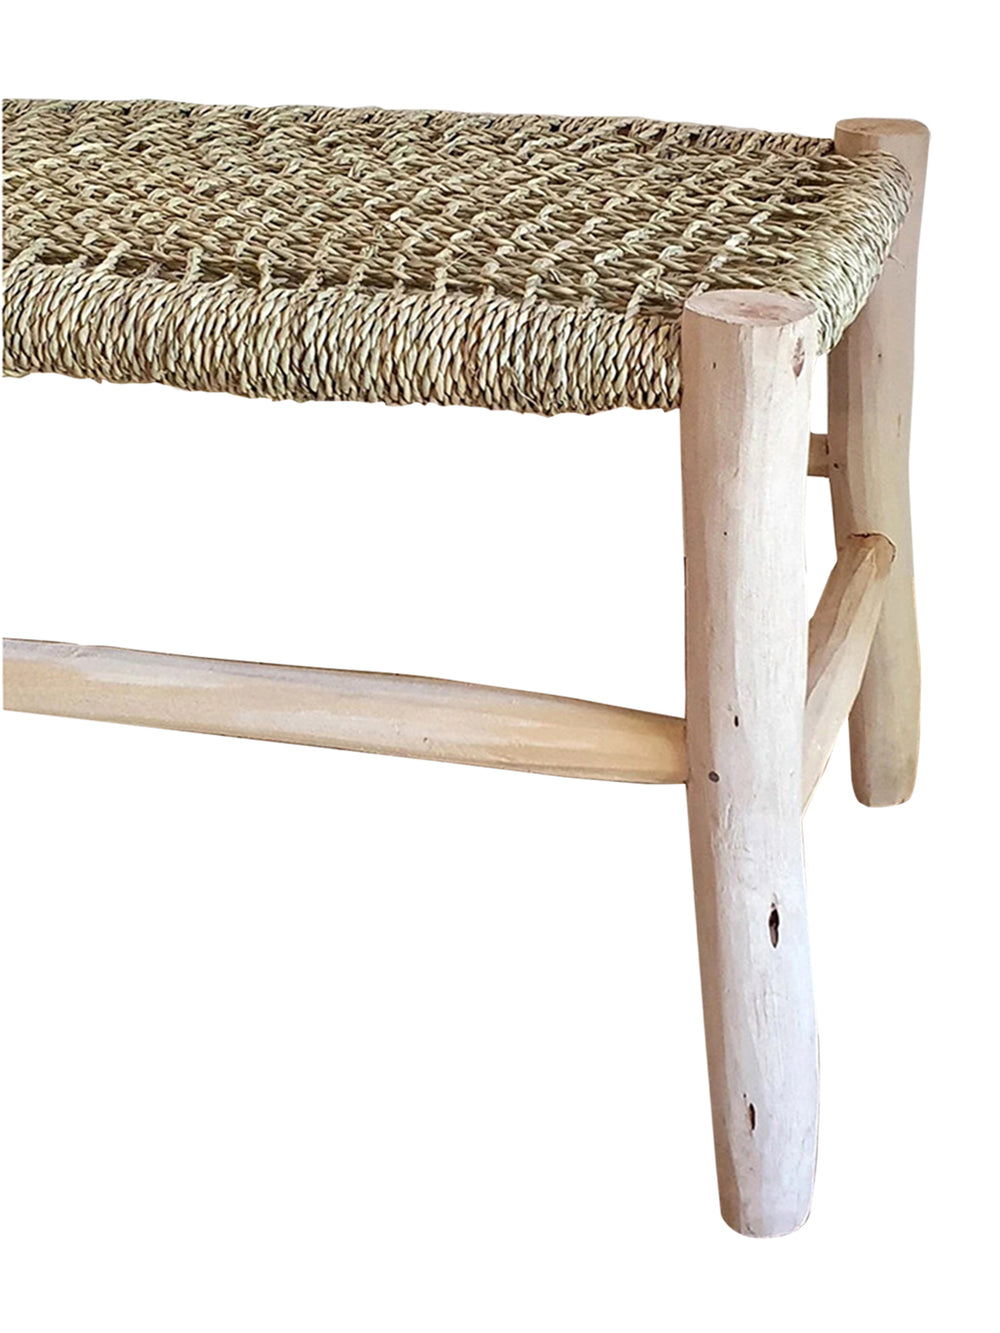 Handcrafted Natural Braiding Solid Wood Bench Libitii Benches LIB-0059-1